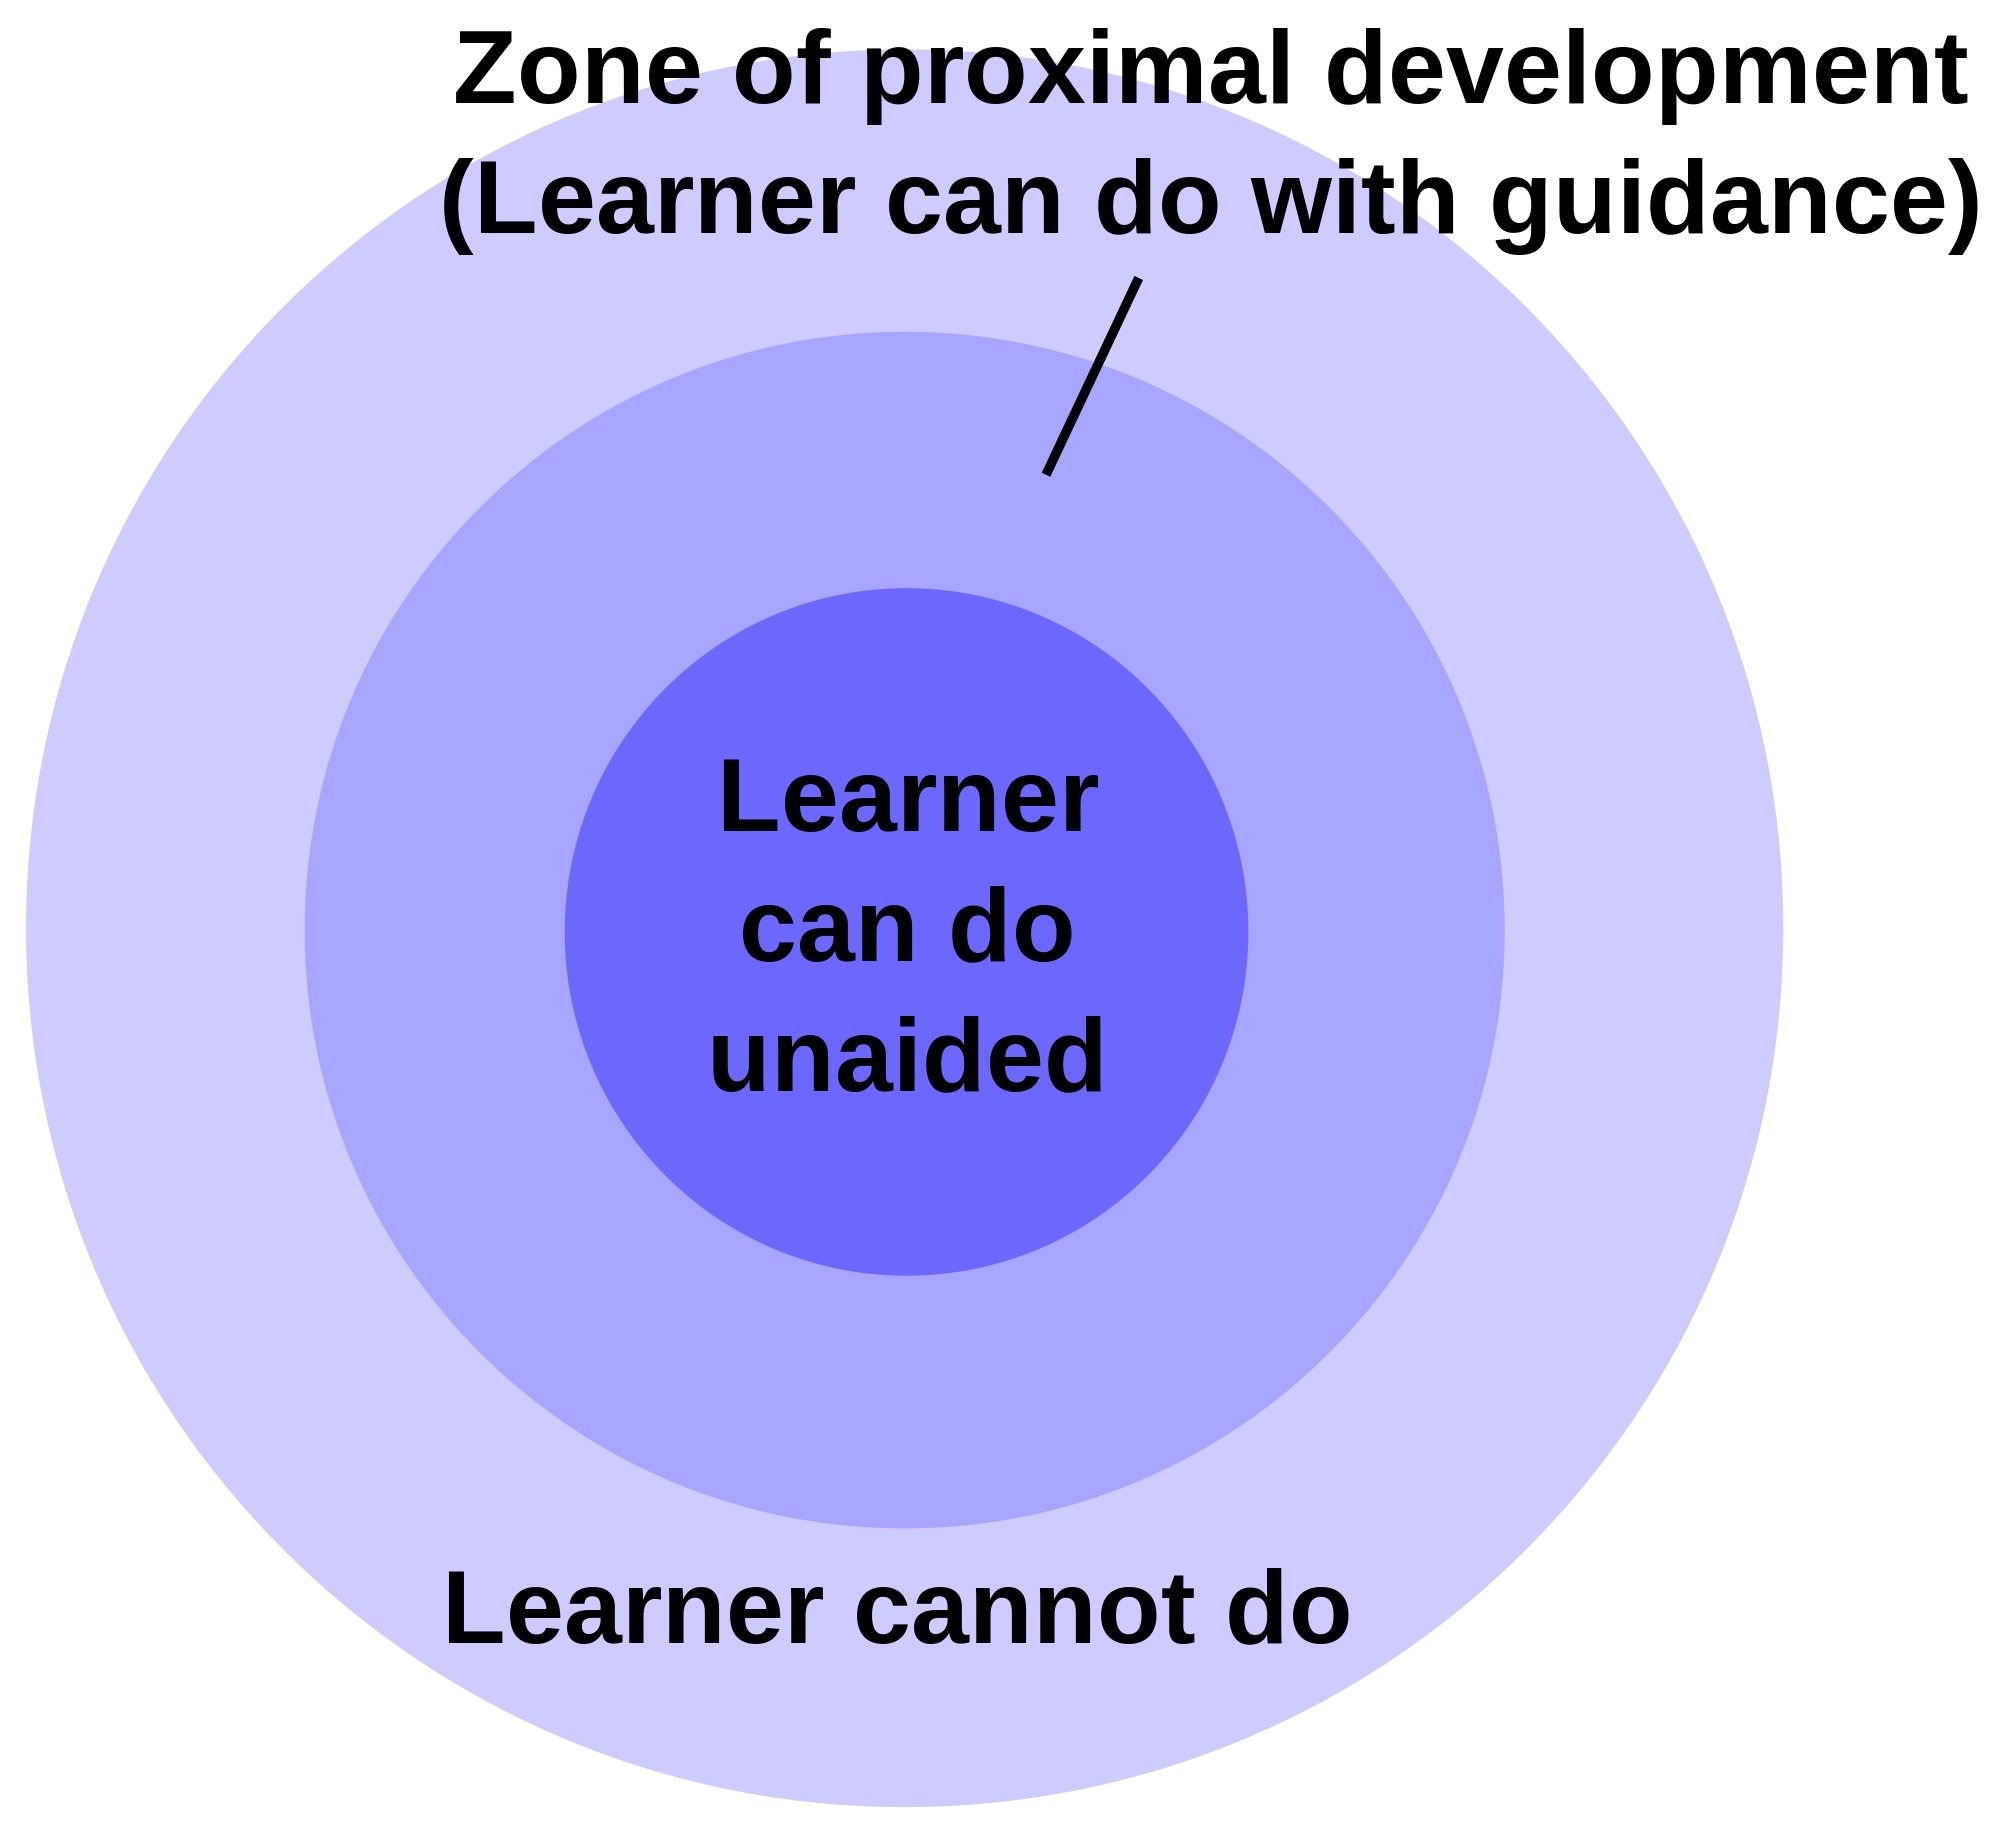 Image of learning Zones